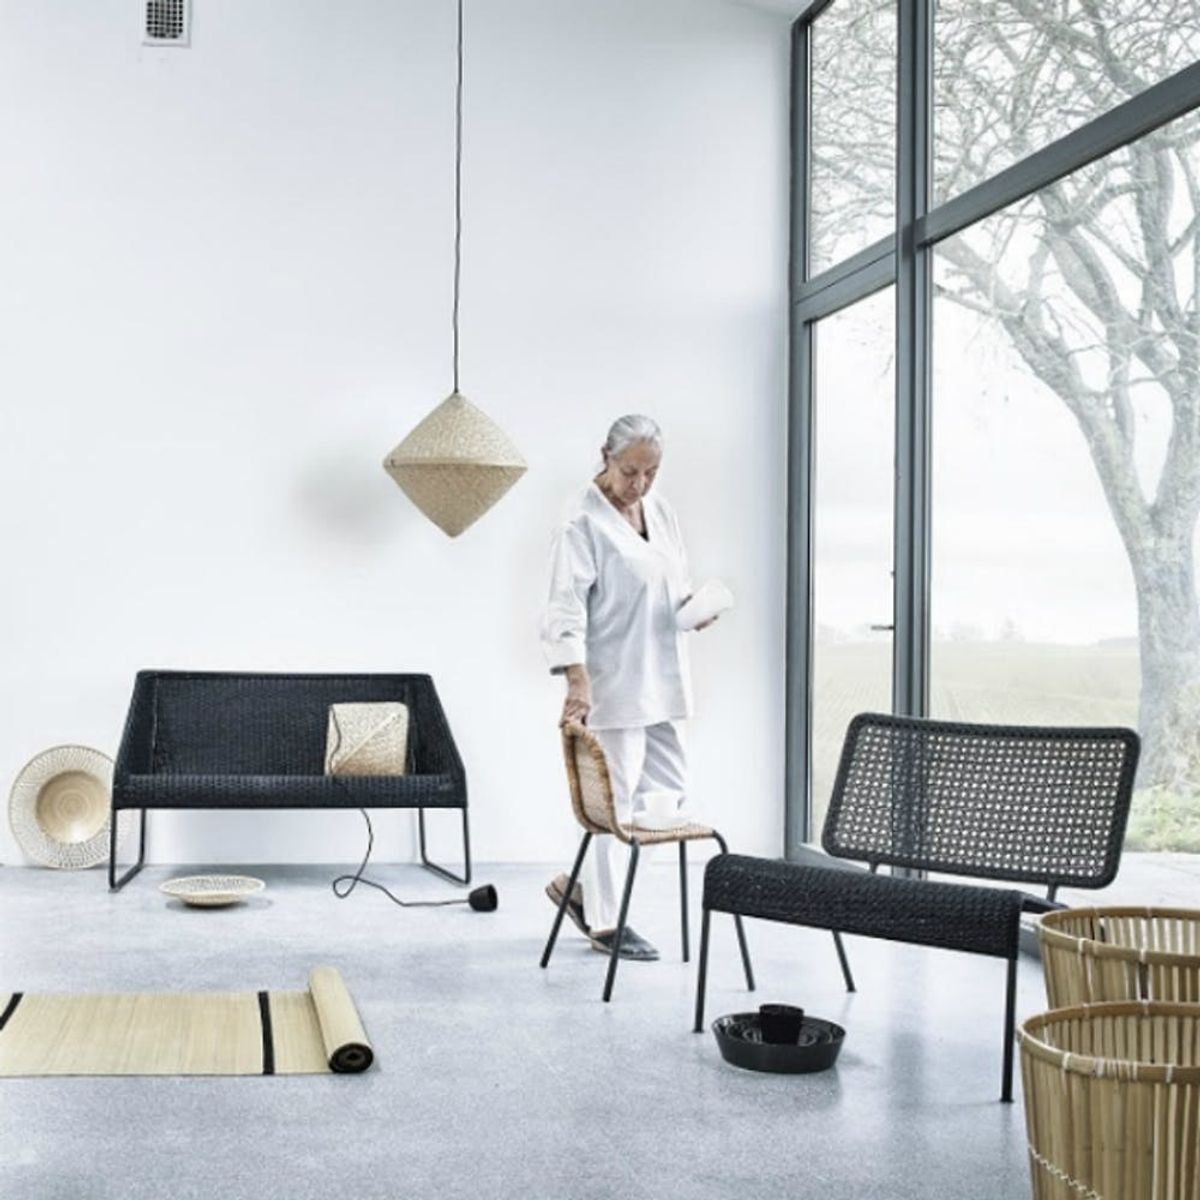 IKEA’s Latest Collab Is All Kinds of Minimalist Chic